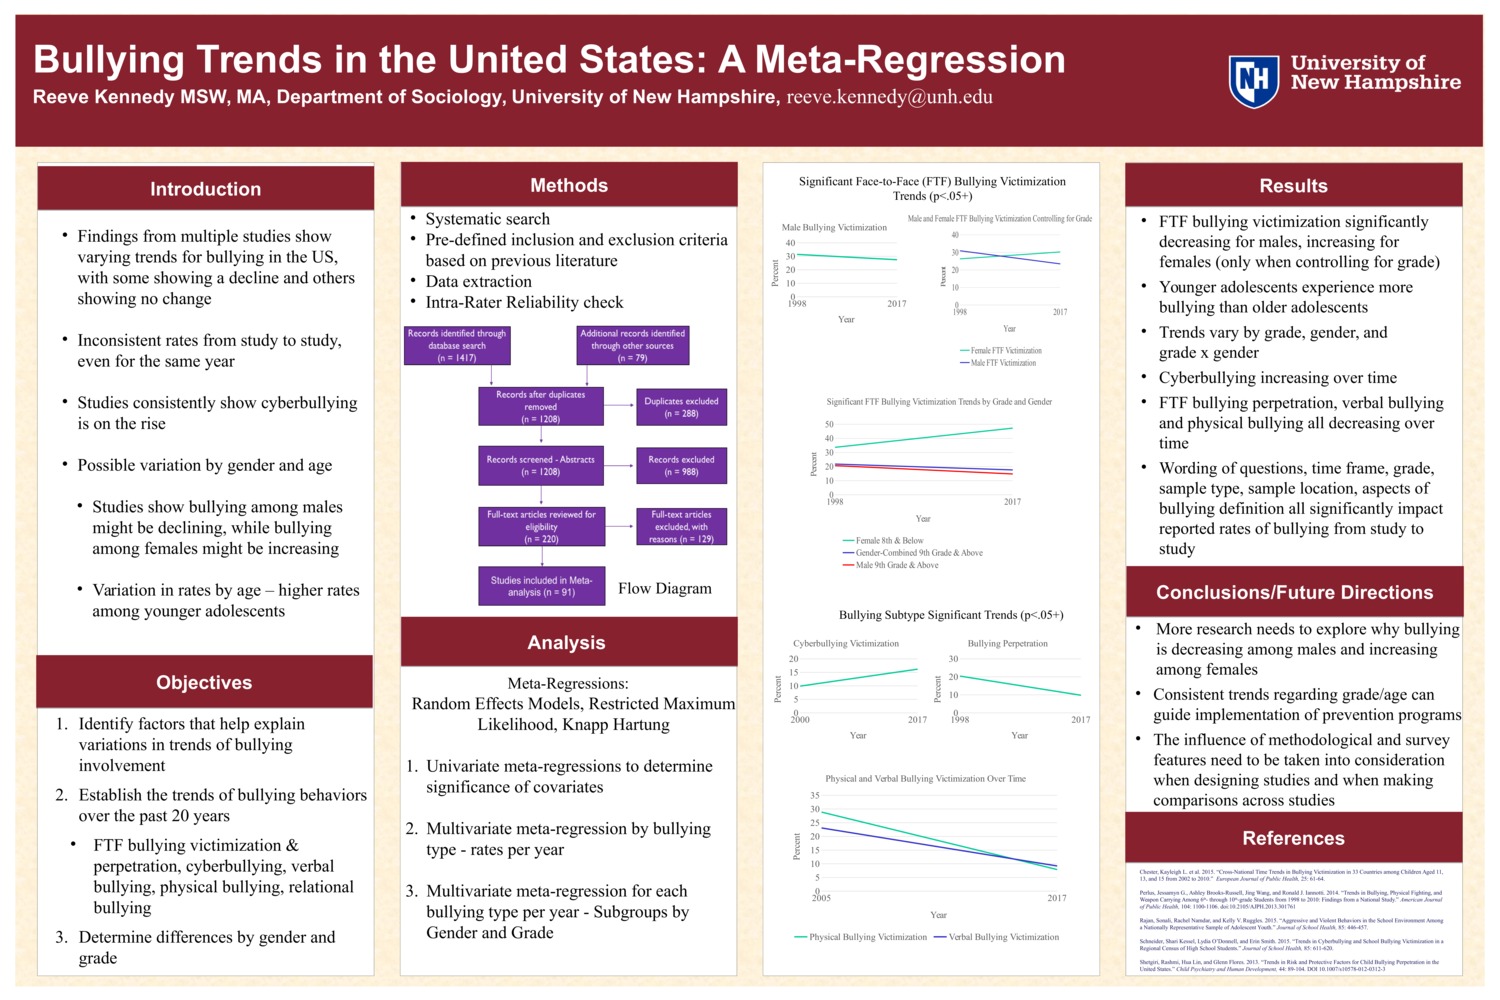 Bullying Trends In The United States: A Meta-Regression by rsp9